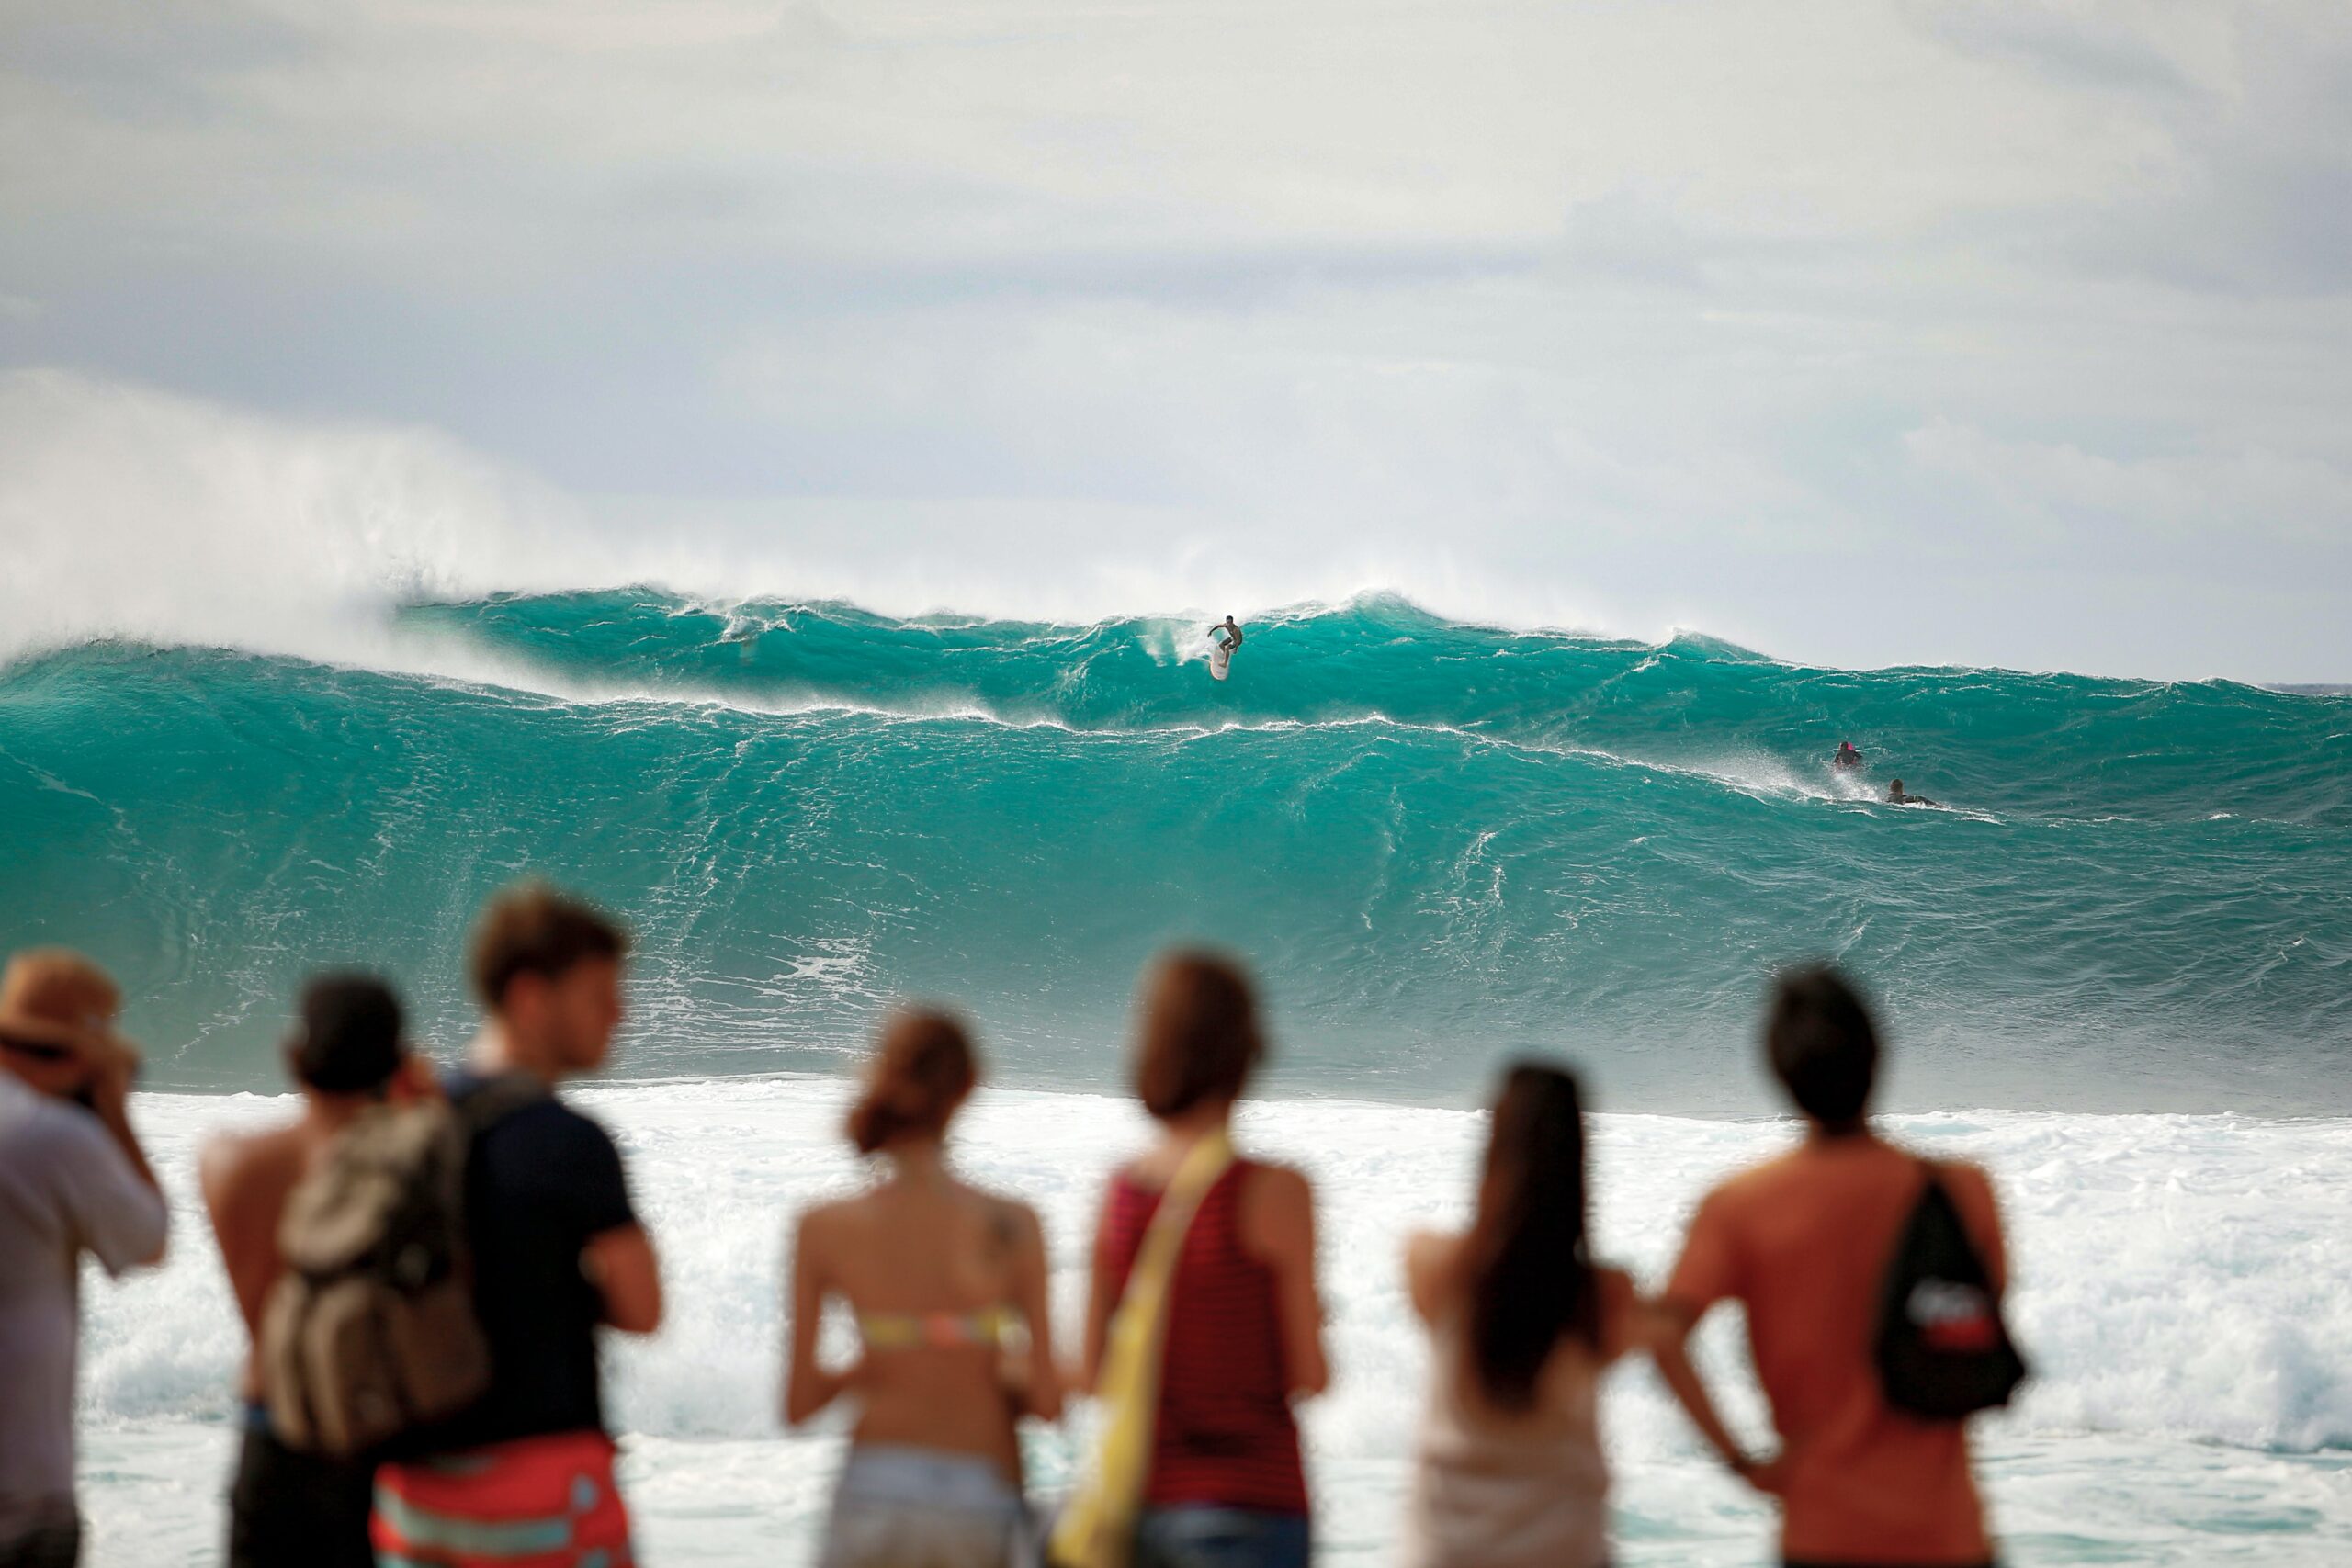 what is big wave surfing